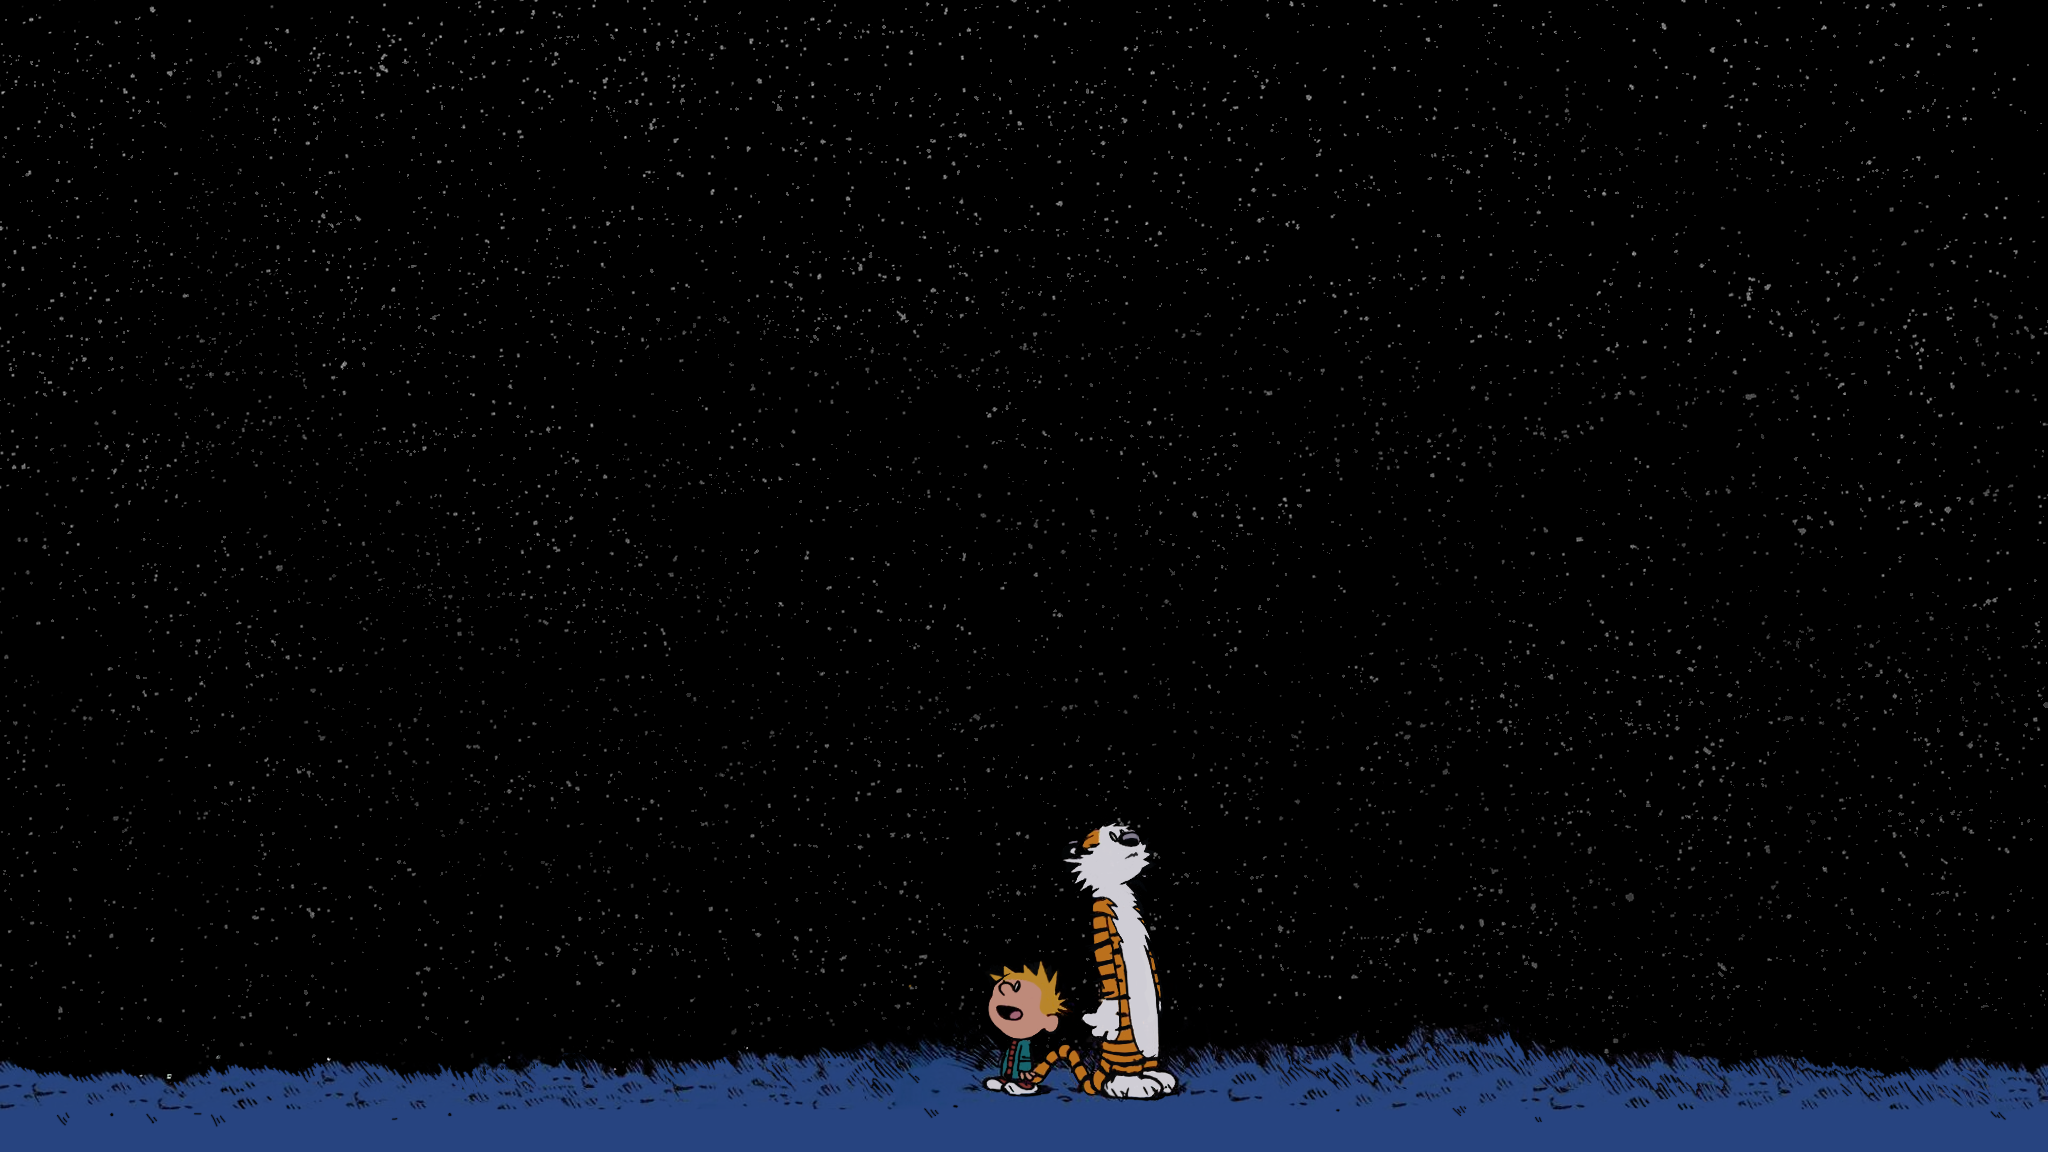 81 Calvin & Hobbes wallpapers optimized for 1920x1080 : pics